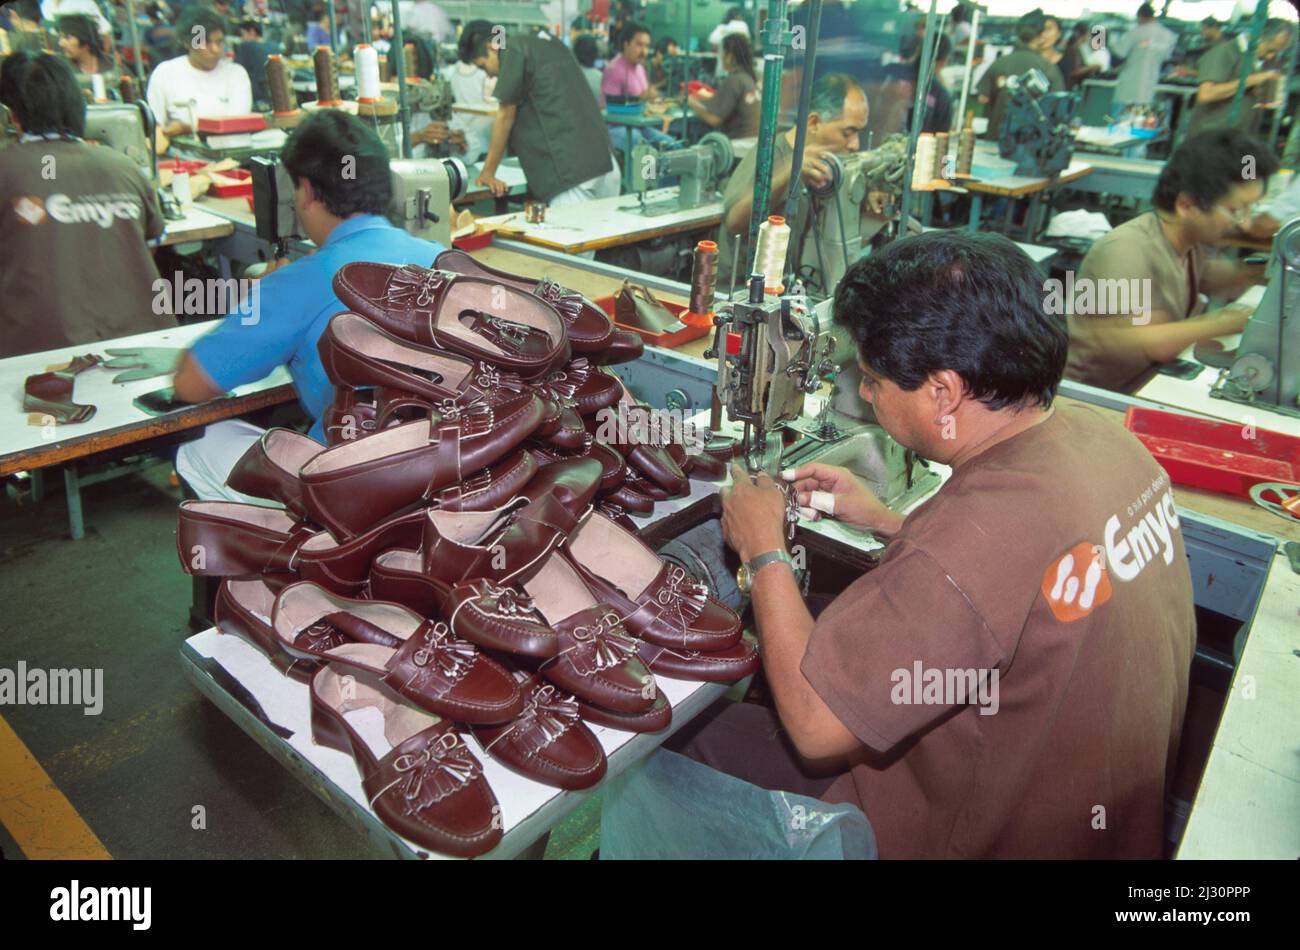 Leon Mexico,Mexican Hispanic,Emyco Shoe Factory,employees working employee worker workers shoes inside interior manufacturing Stock Photo